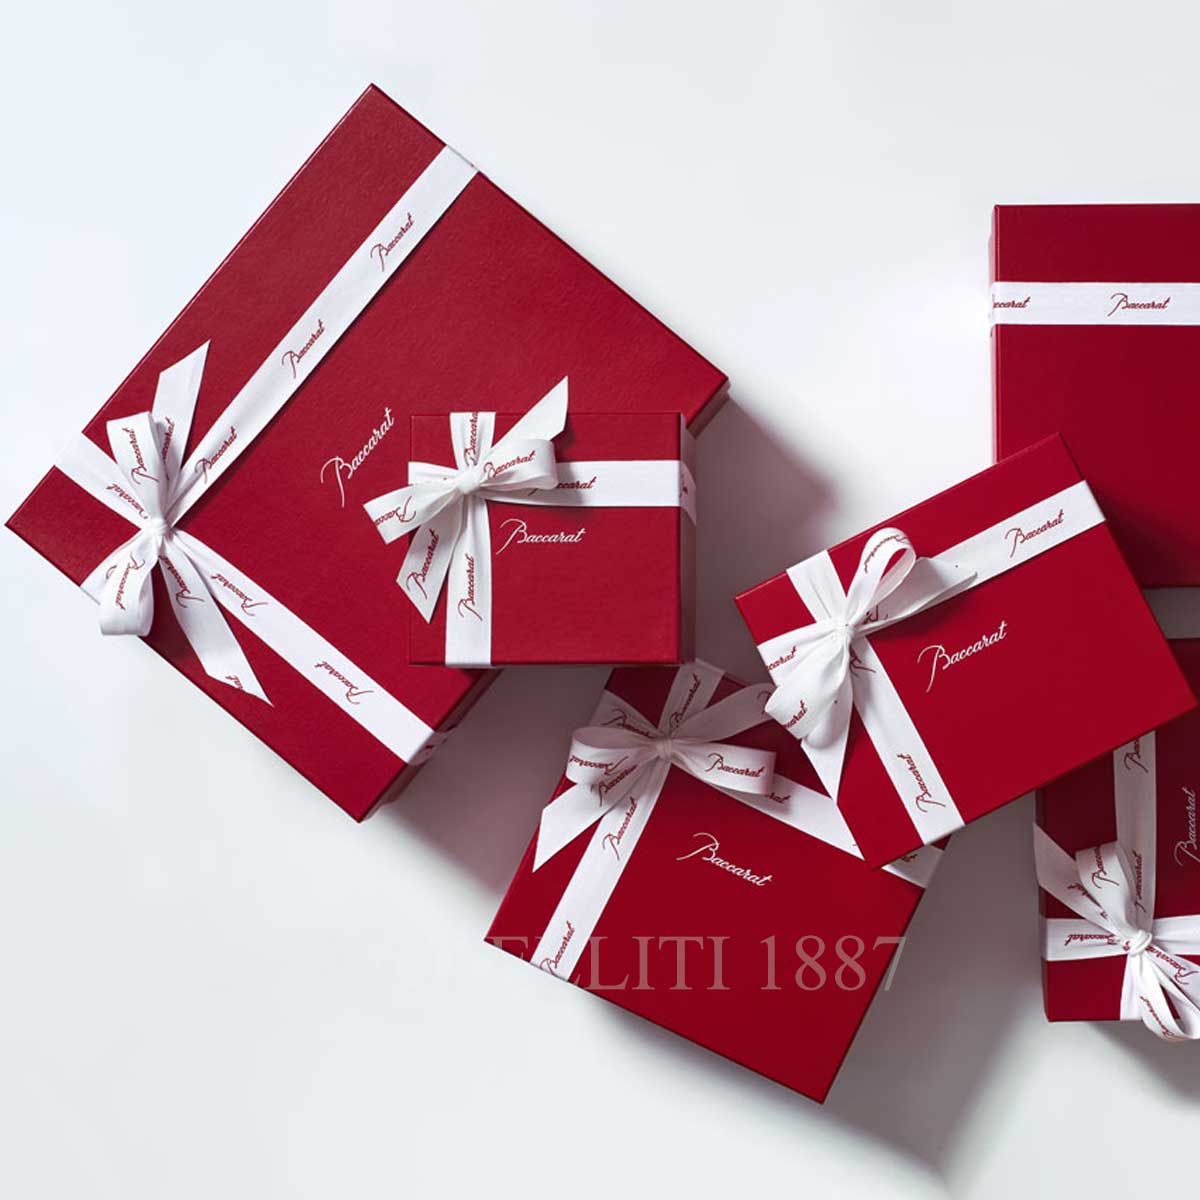 baccarat gift boxes